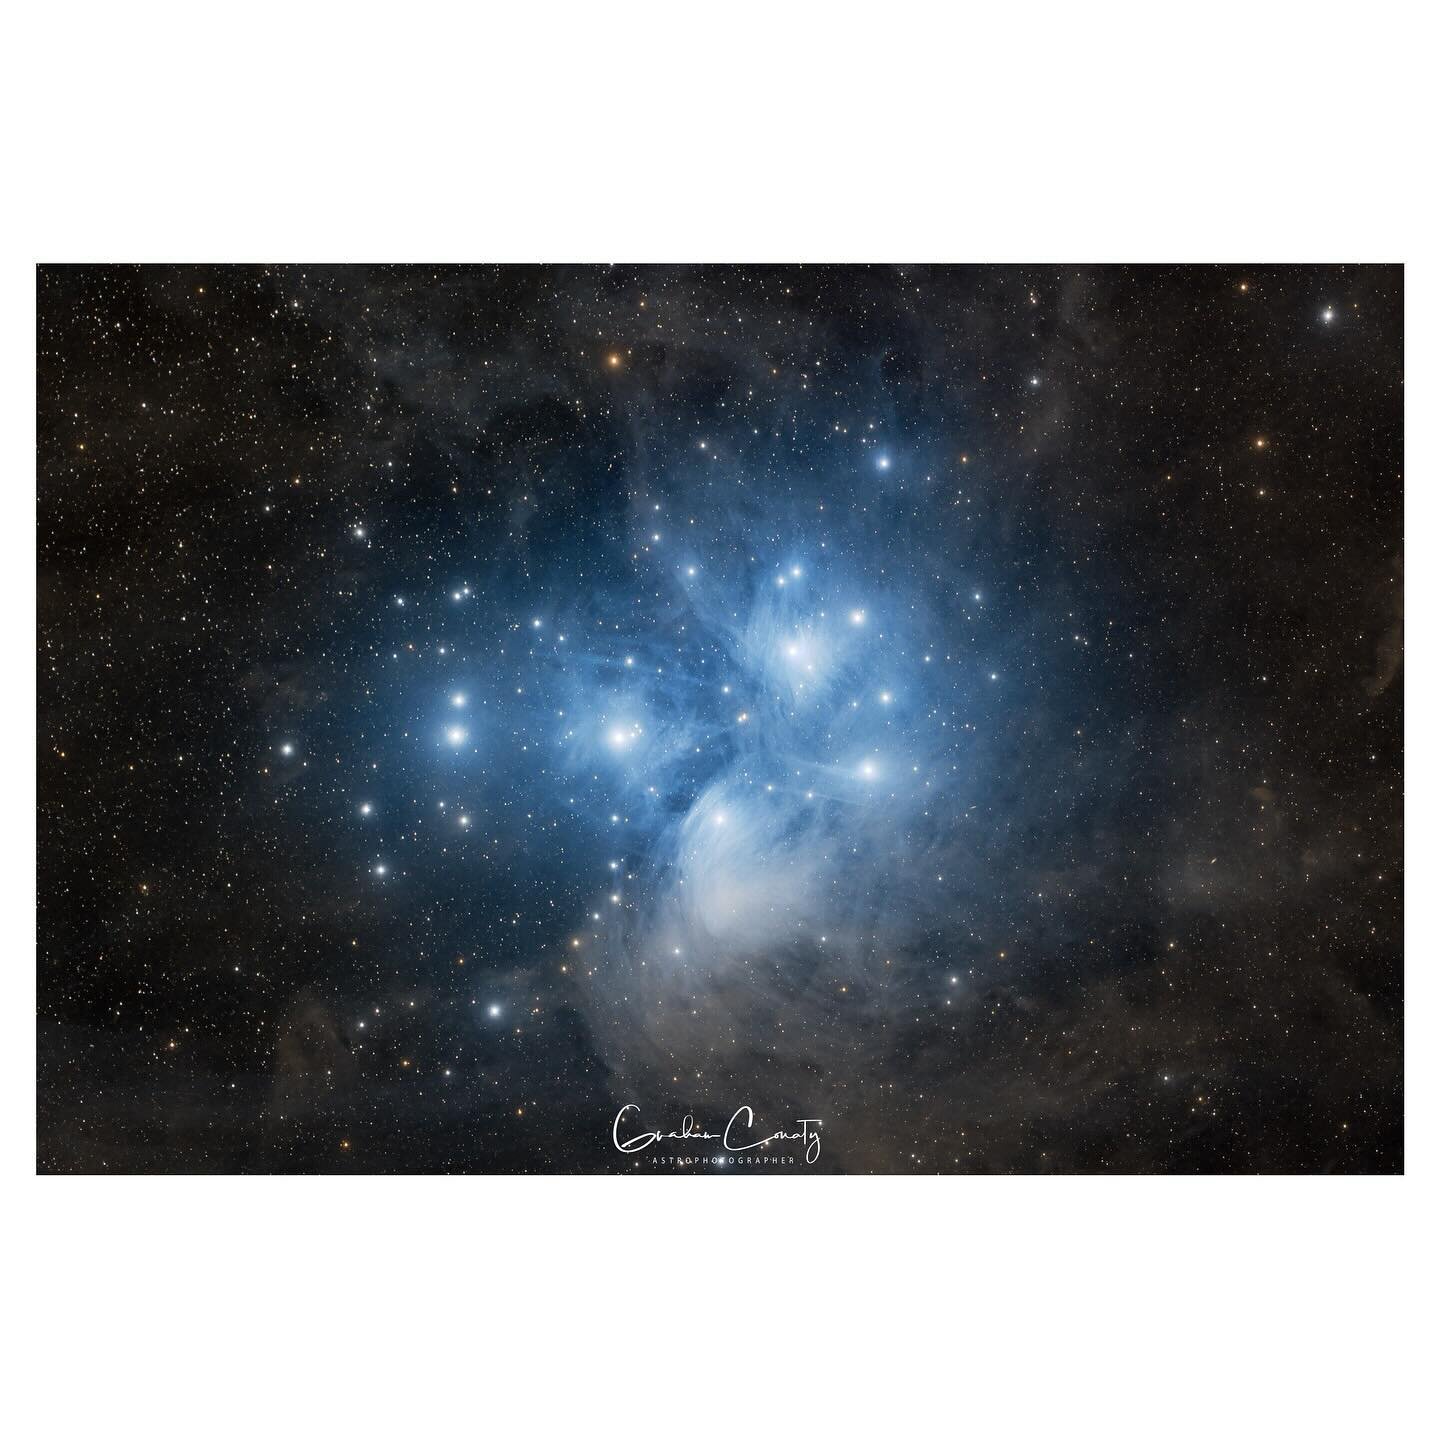 The Pleiades, also known as The Seven Sisters or Messier 45, is an asterism and an open star cluster containing middle-aged, hot B-type stars in the north-west of the constellation Taurus. 
.
In many Australian Aboriginal cultures, the Pleiades are a